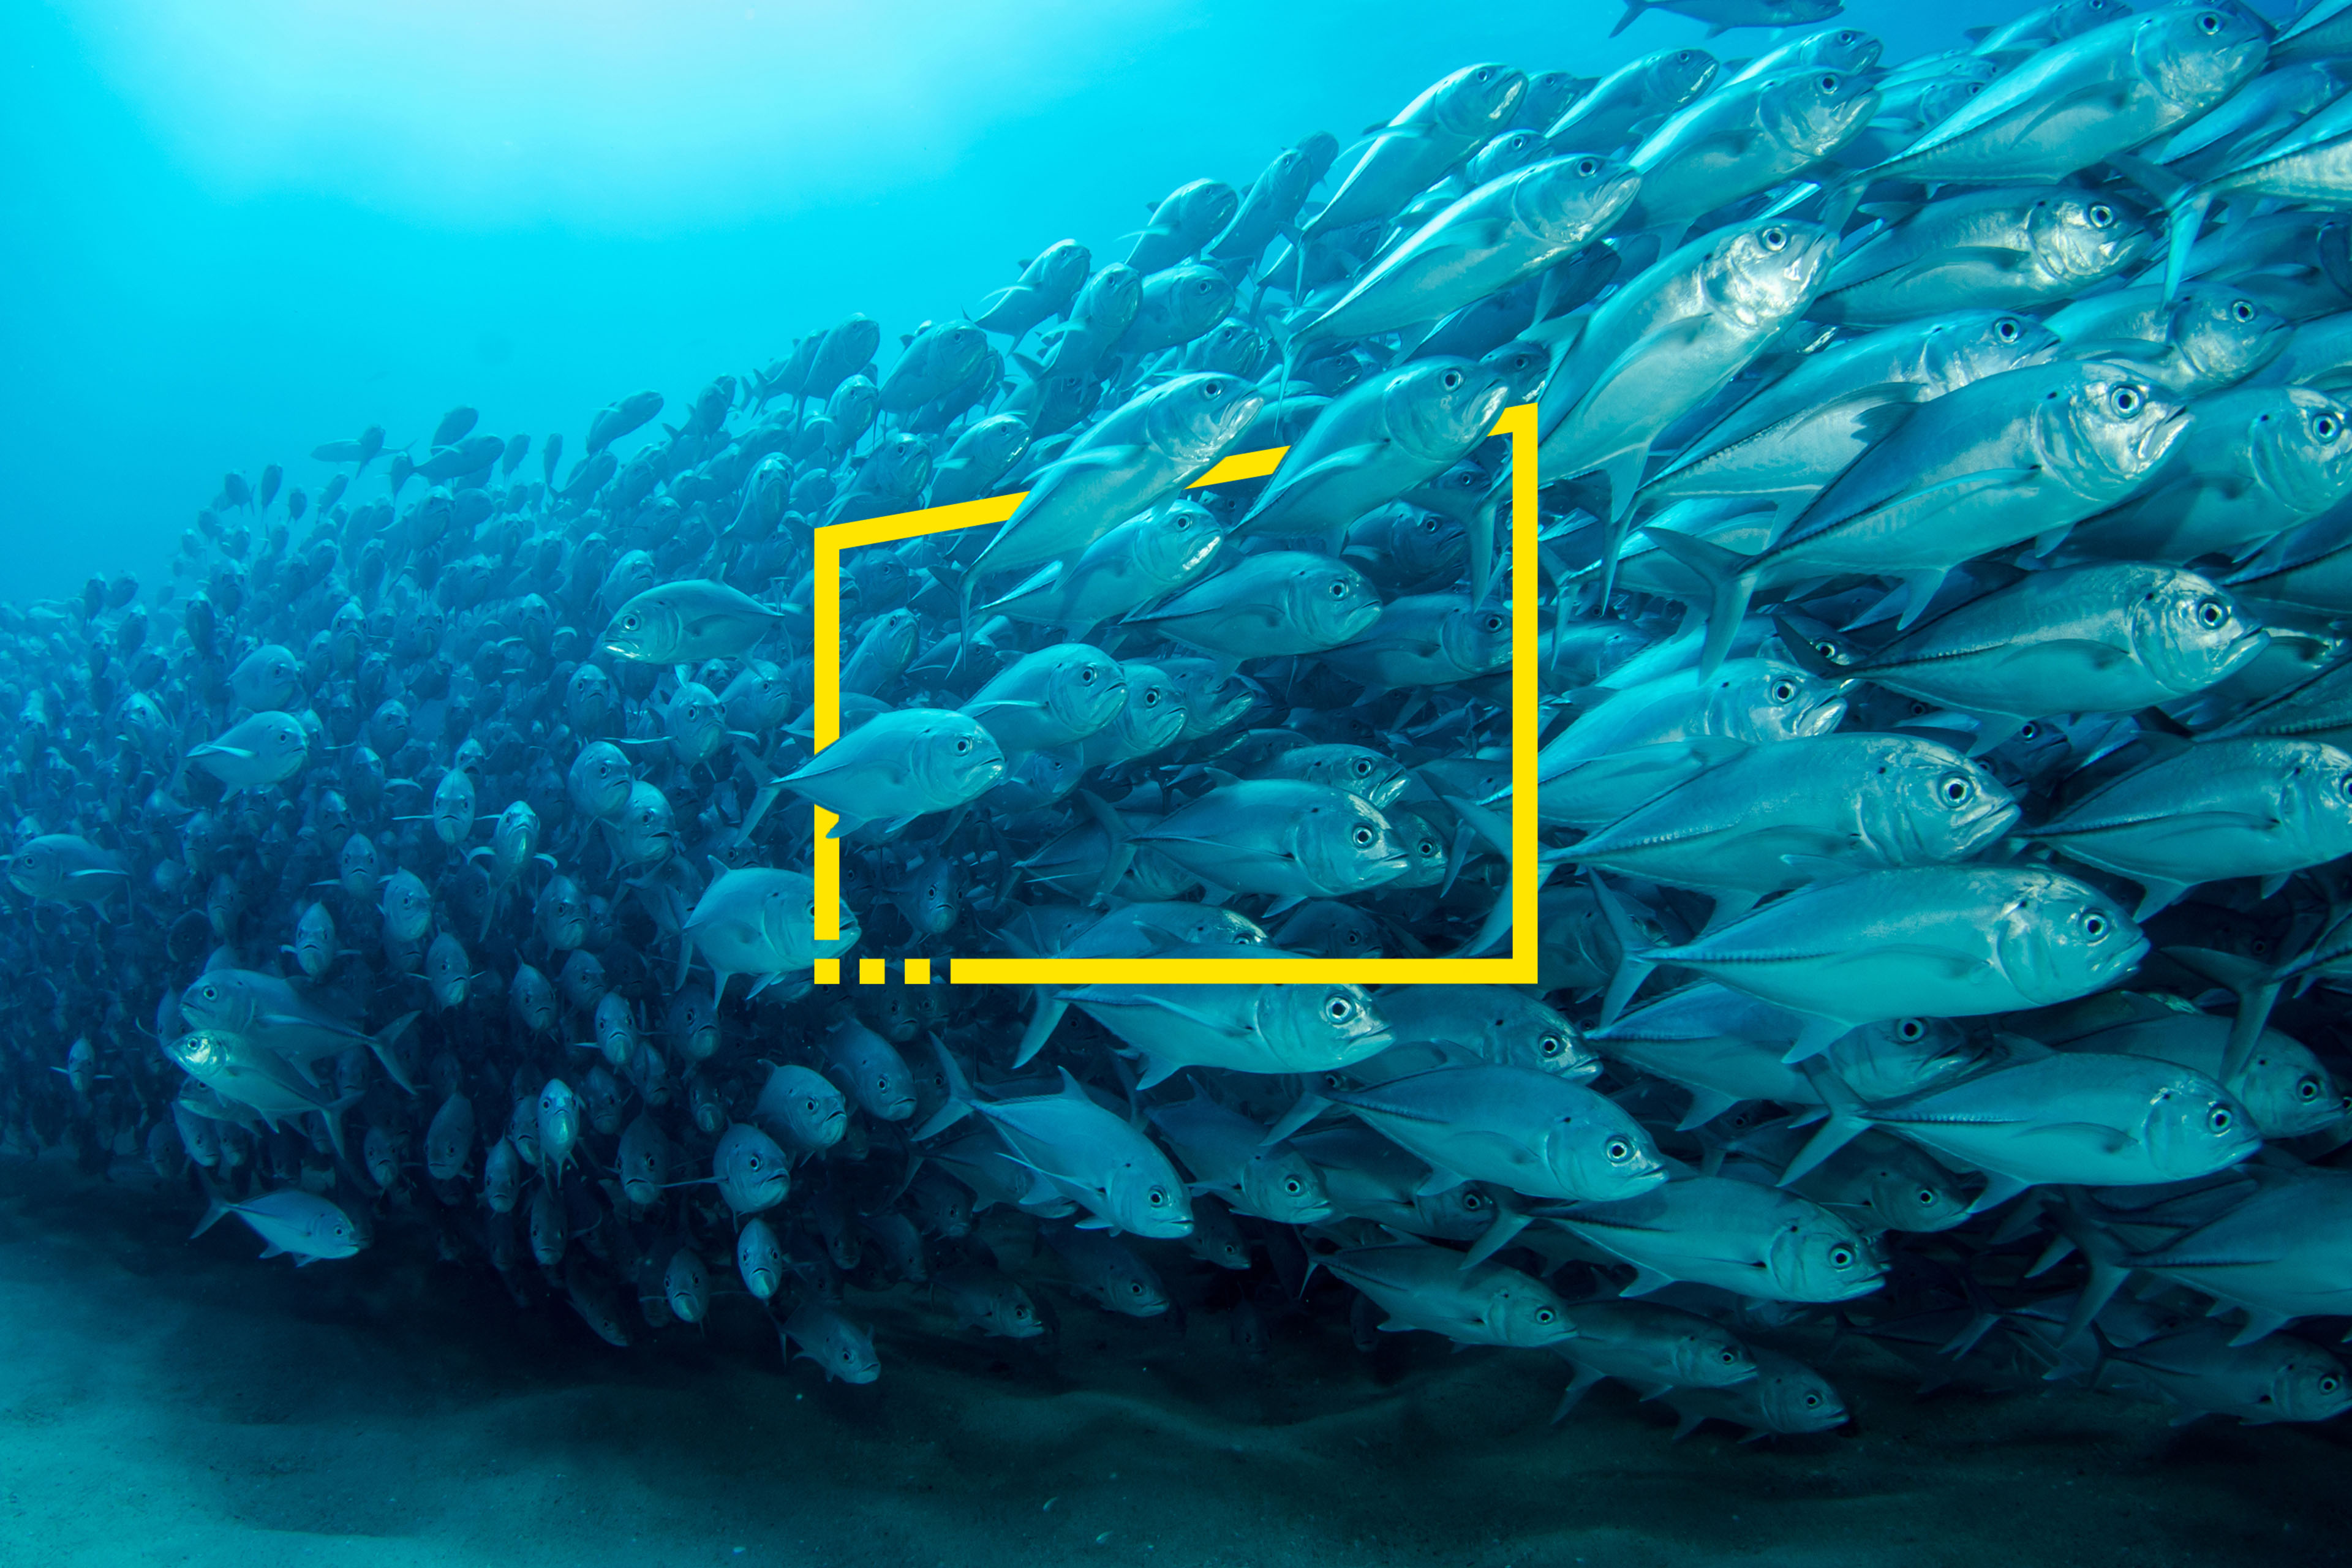 A school of bigeye trevally in the sea of cortez